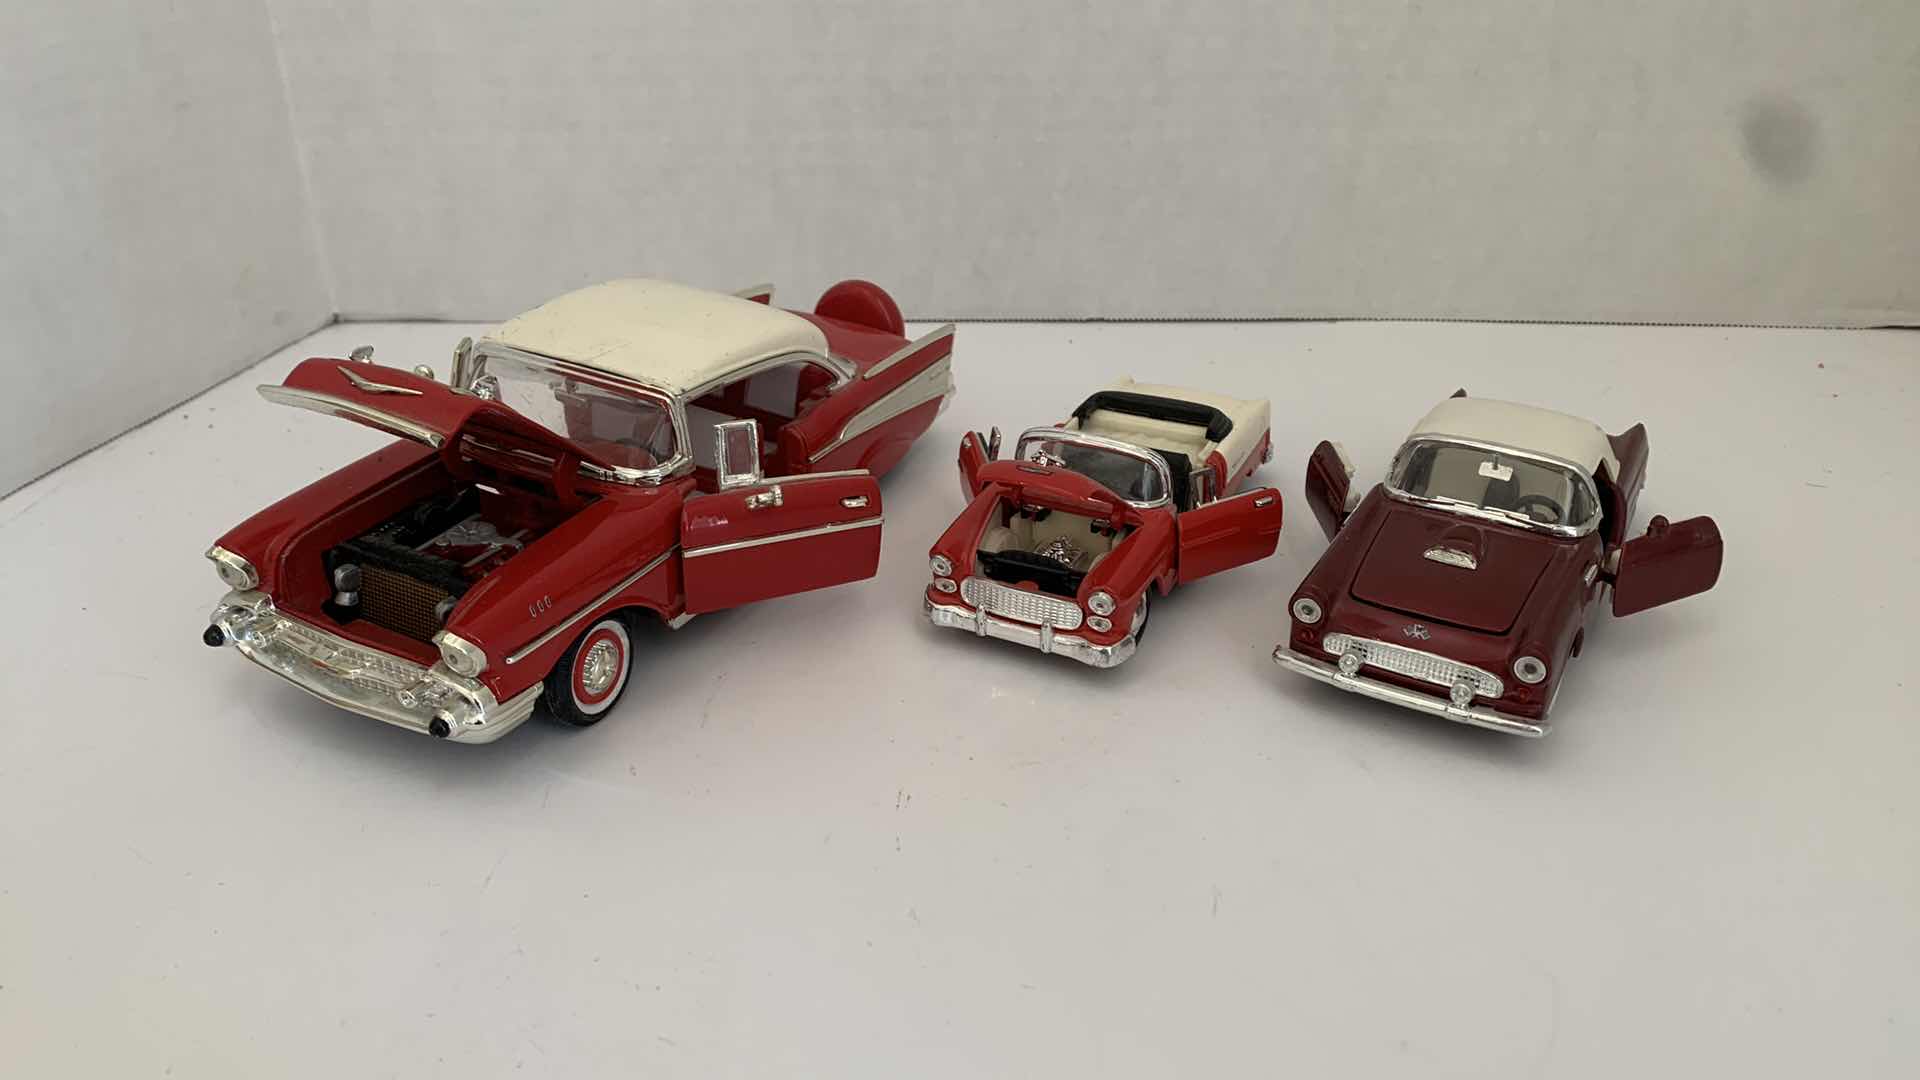 Photo 1 of SET OF 3 DIE CAST METAL 1950S CHEVROLET, LARGEST 9” X 3” H 2.5”